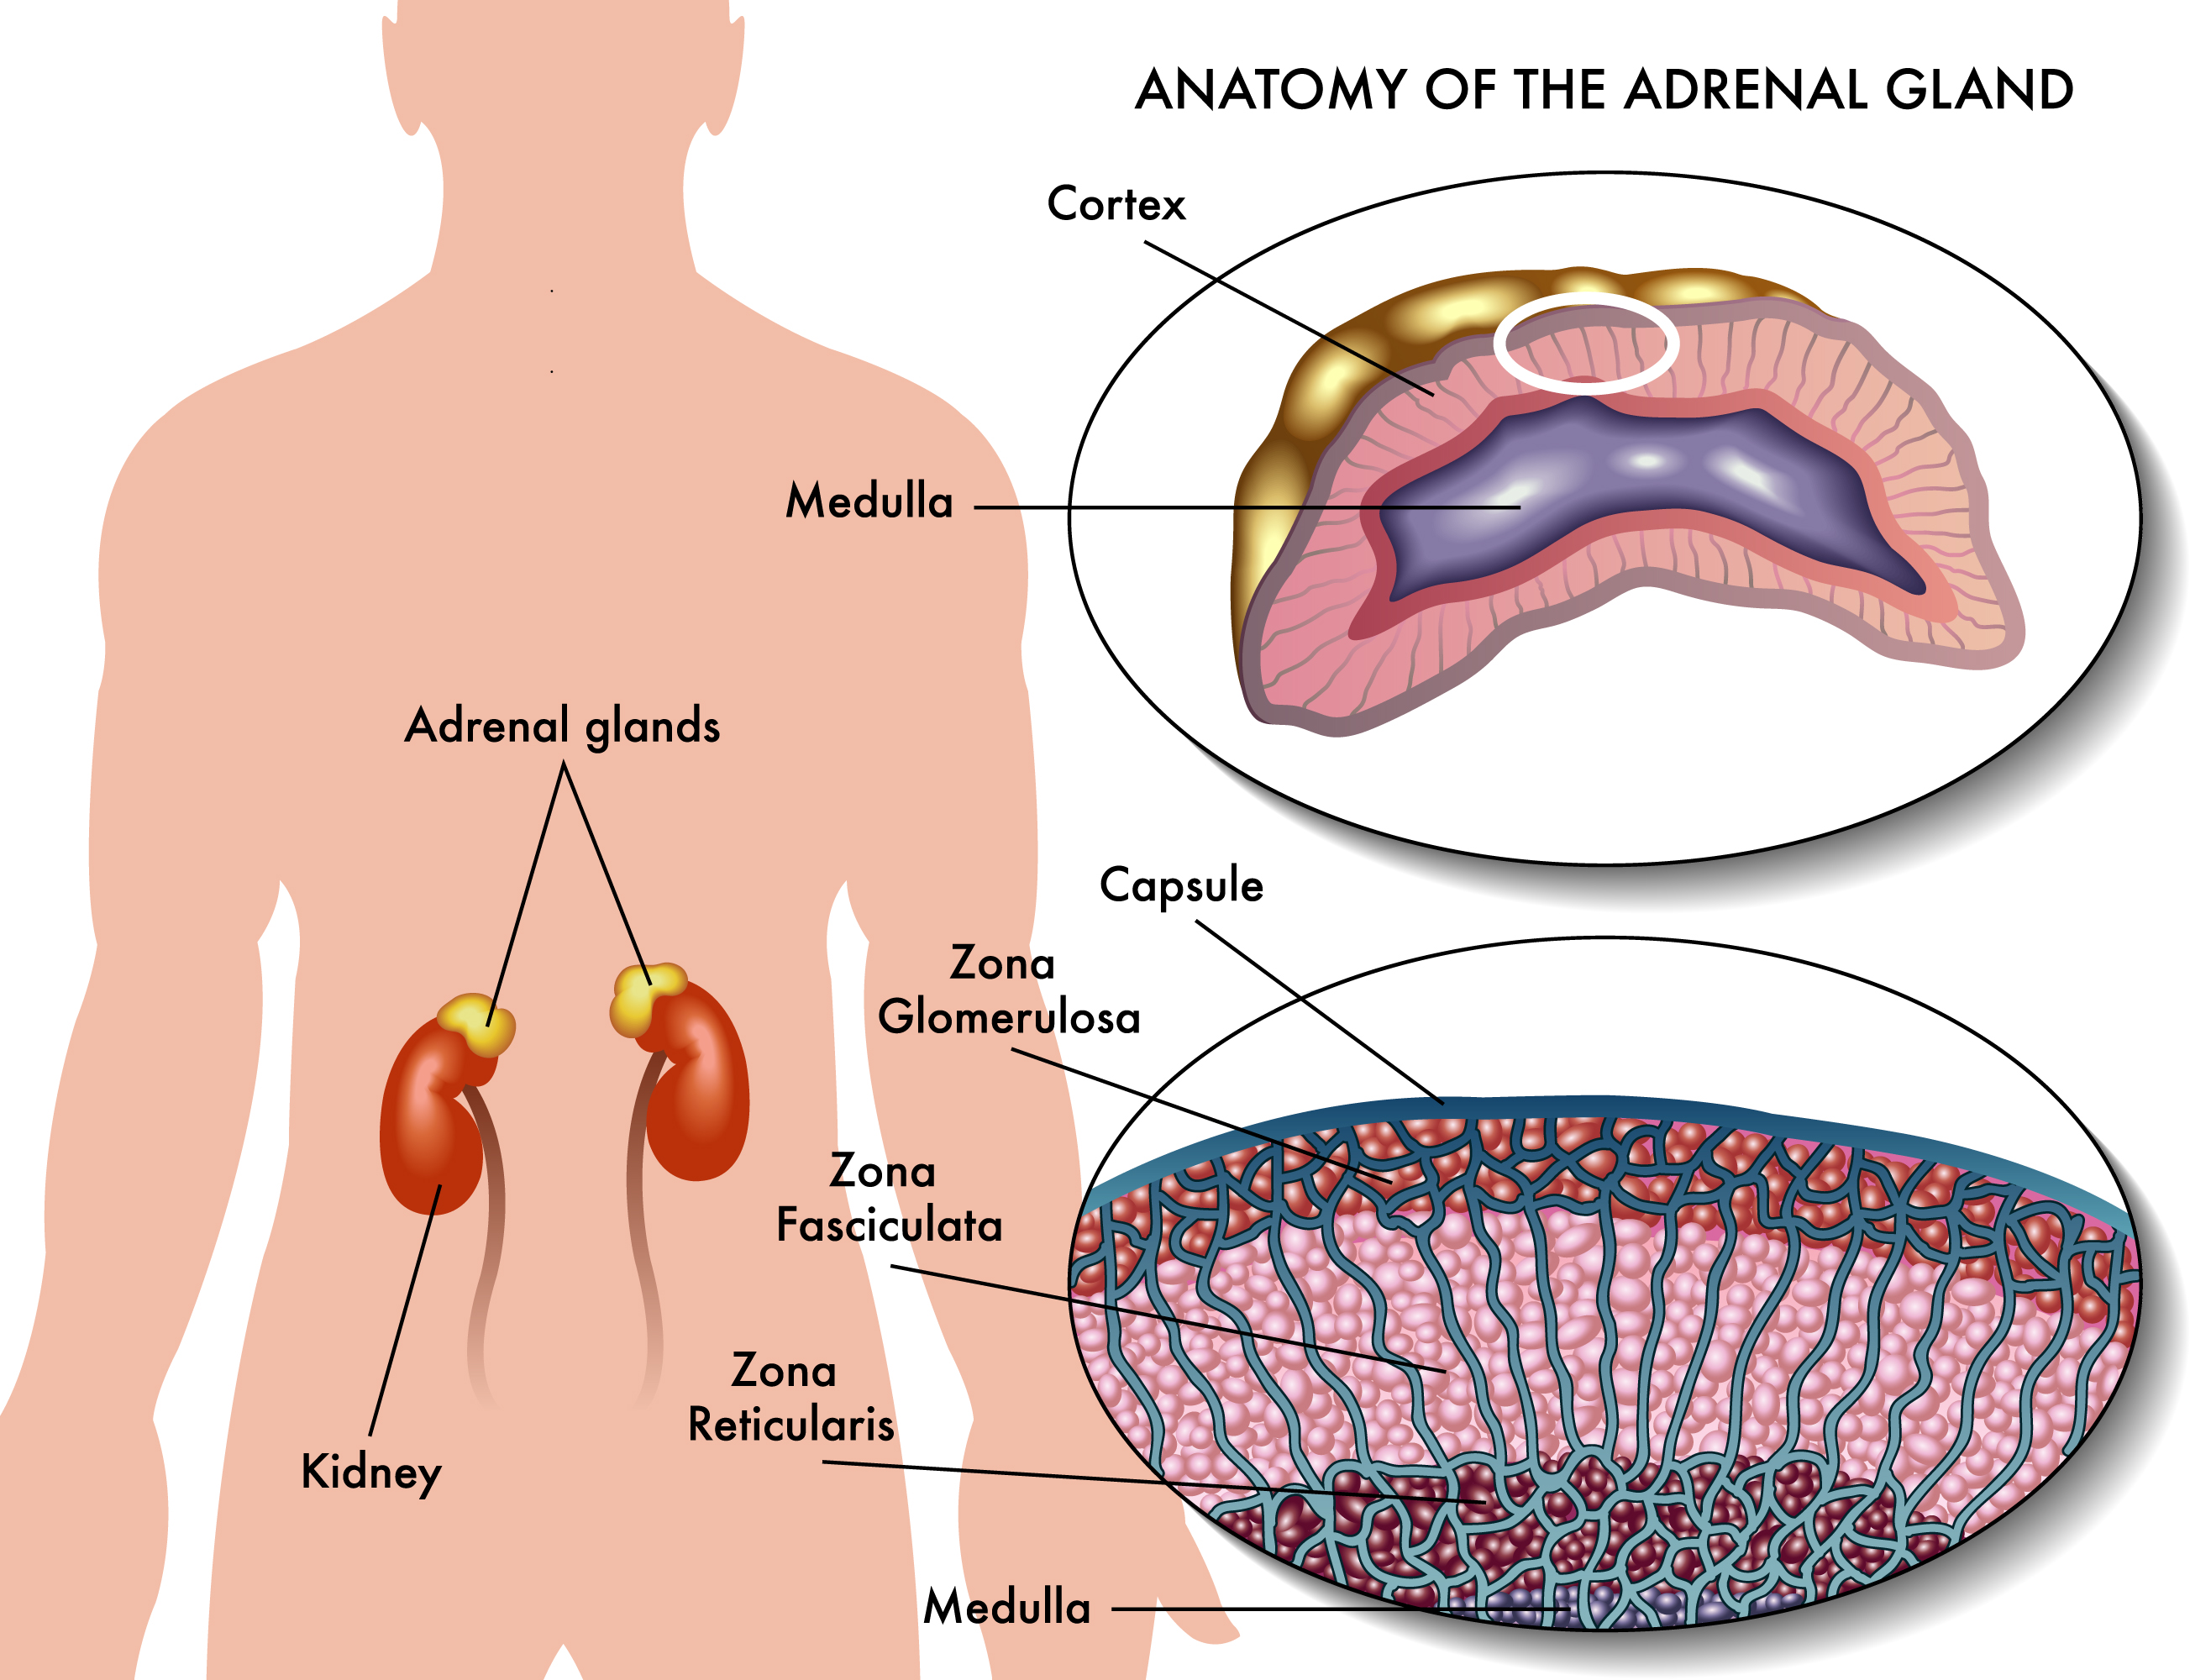 http://yourvascularhealth.com/miscellaneous-forms/adrenal-glands-diagram/